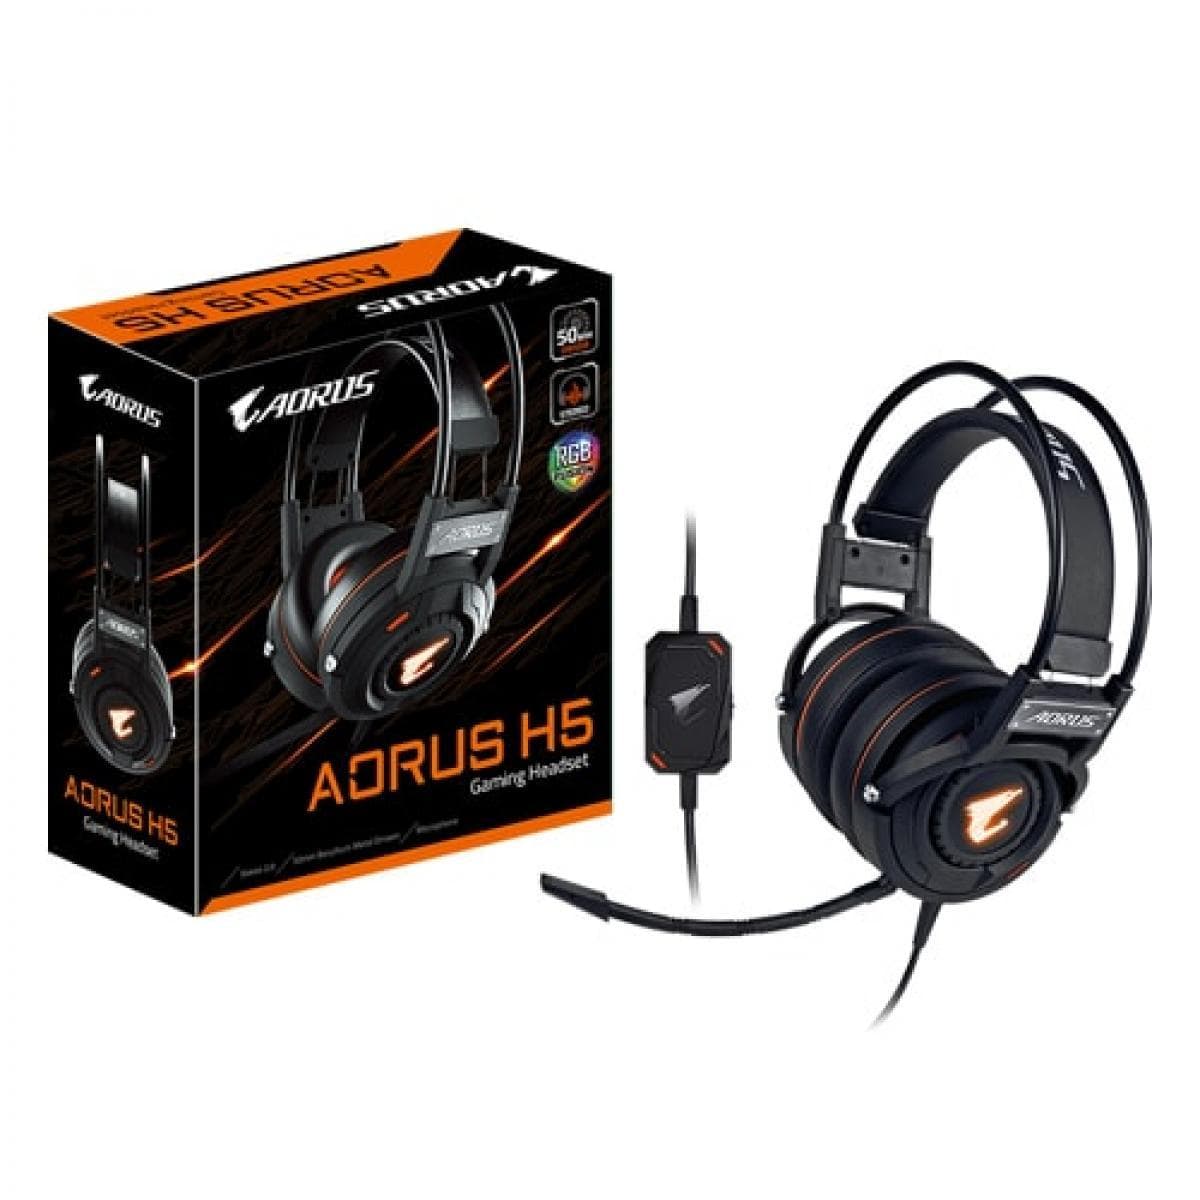 GIGABYTE GAMING HEADSET GIGABYTE AORUS H5 RGB Stereo Gaming Comfort Headset, Detachable and Bendable Microphone, In-line sound controls